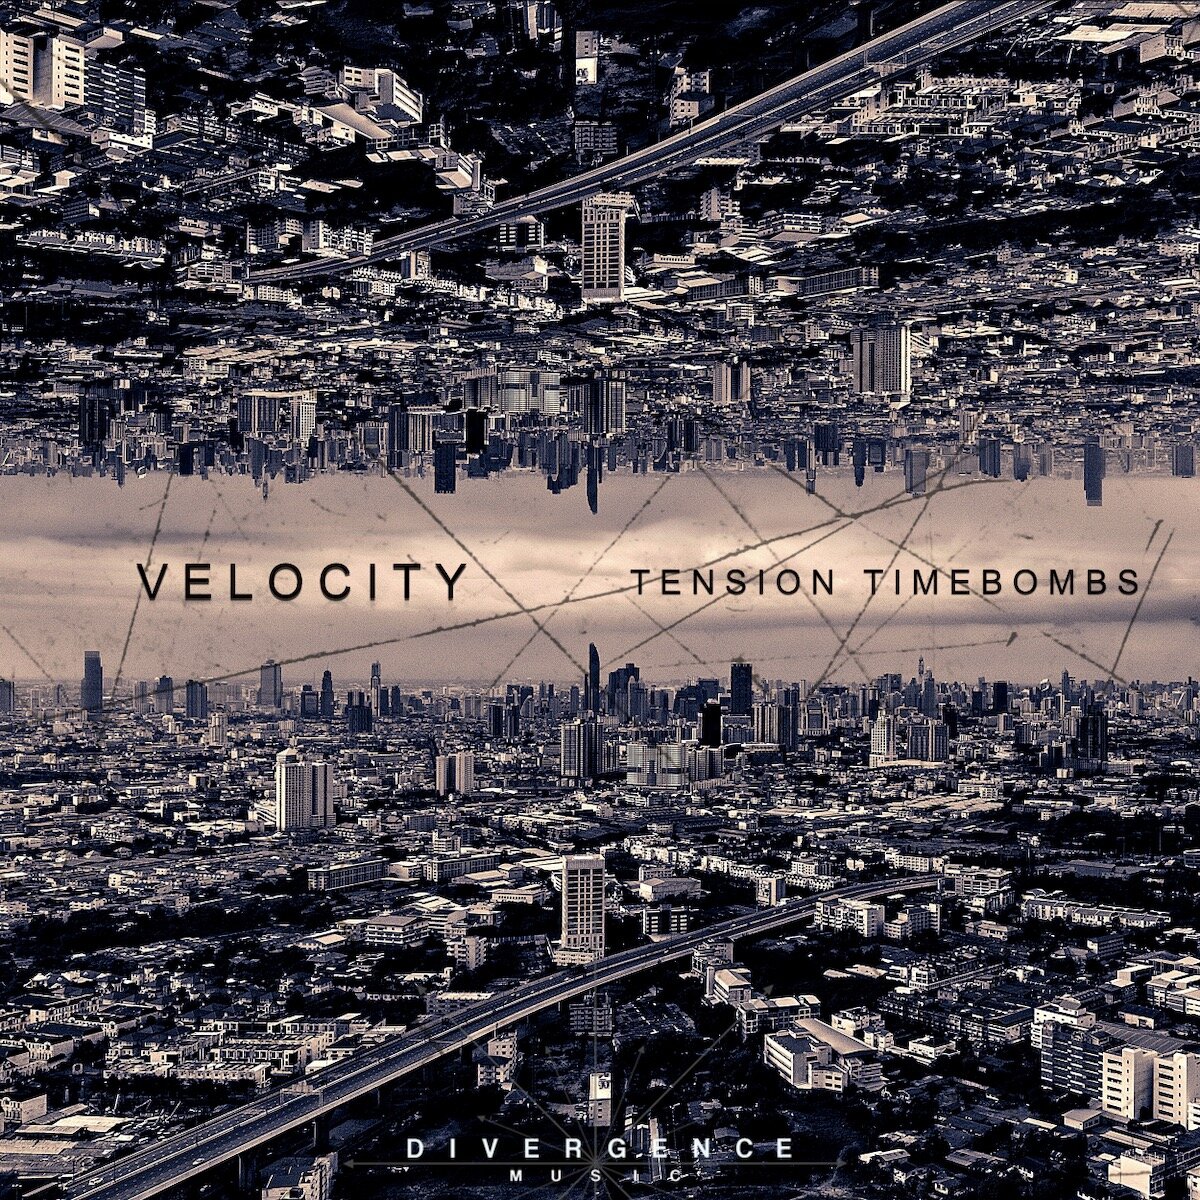 DVRG-010 Velocity_ Tension Timebombs_cover.jpg